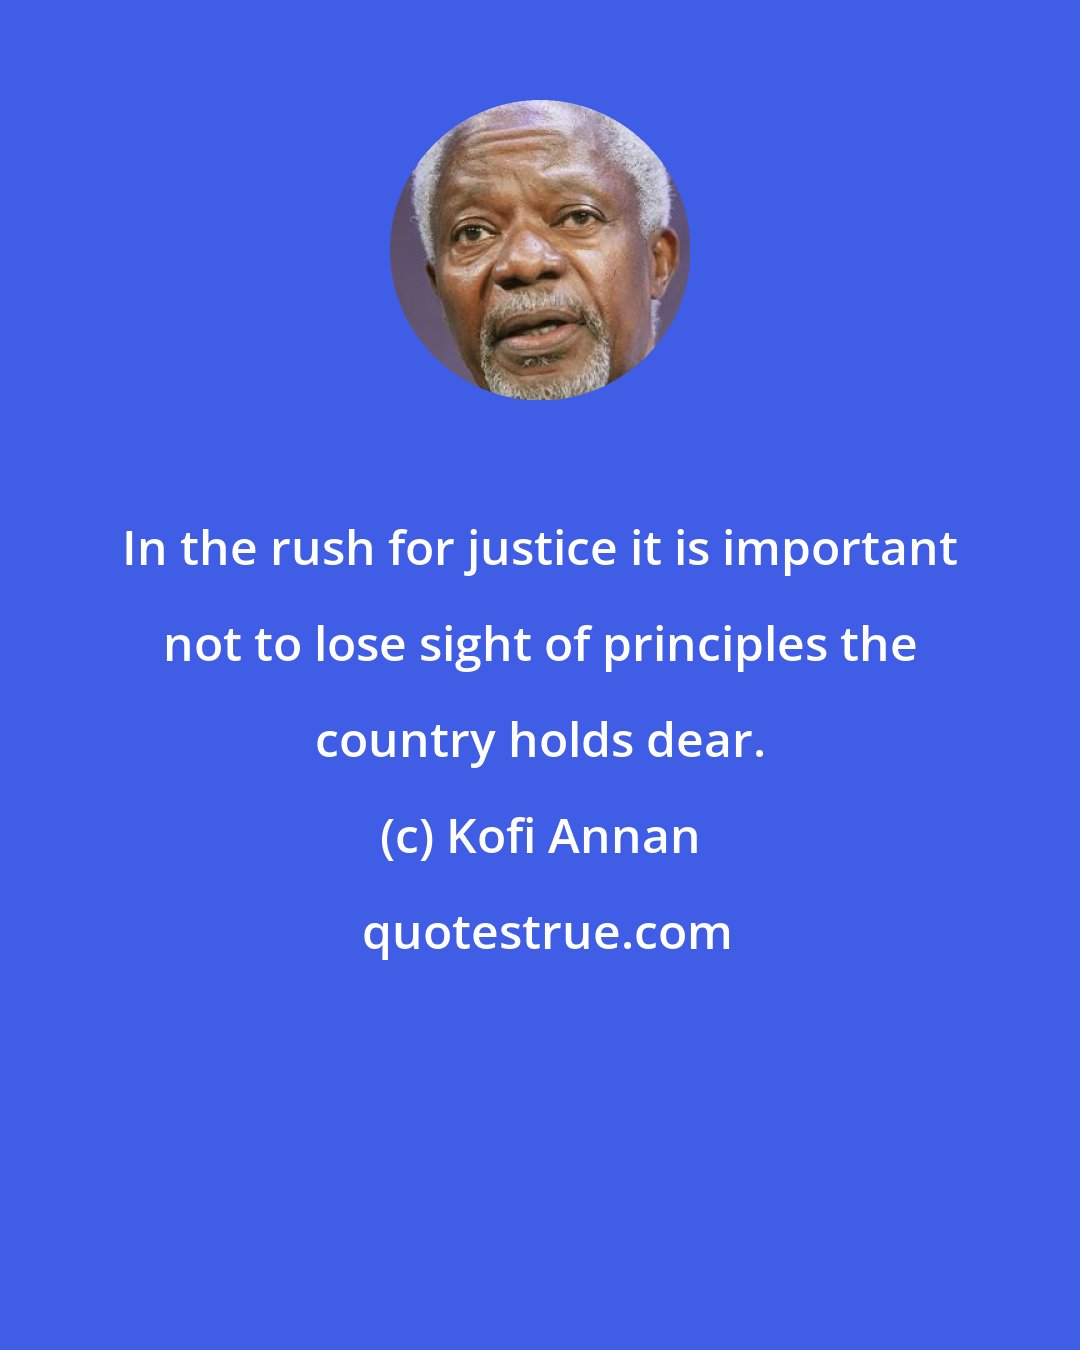 Kofi Annan: In the rush for justice it is important not to lose sight of principles the country holds dear.